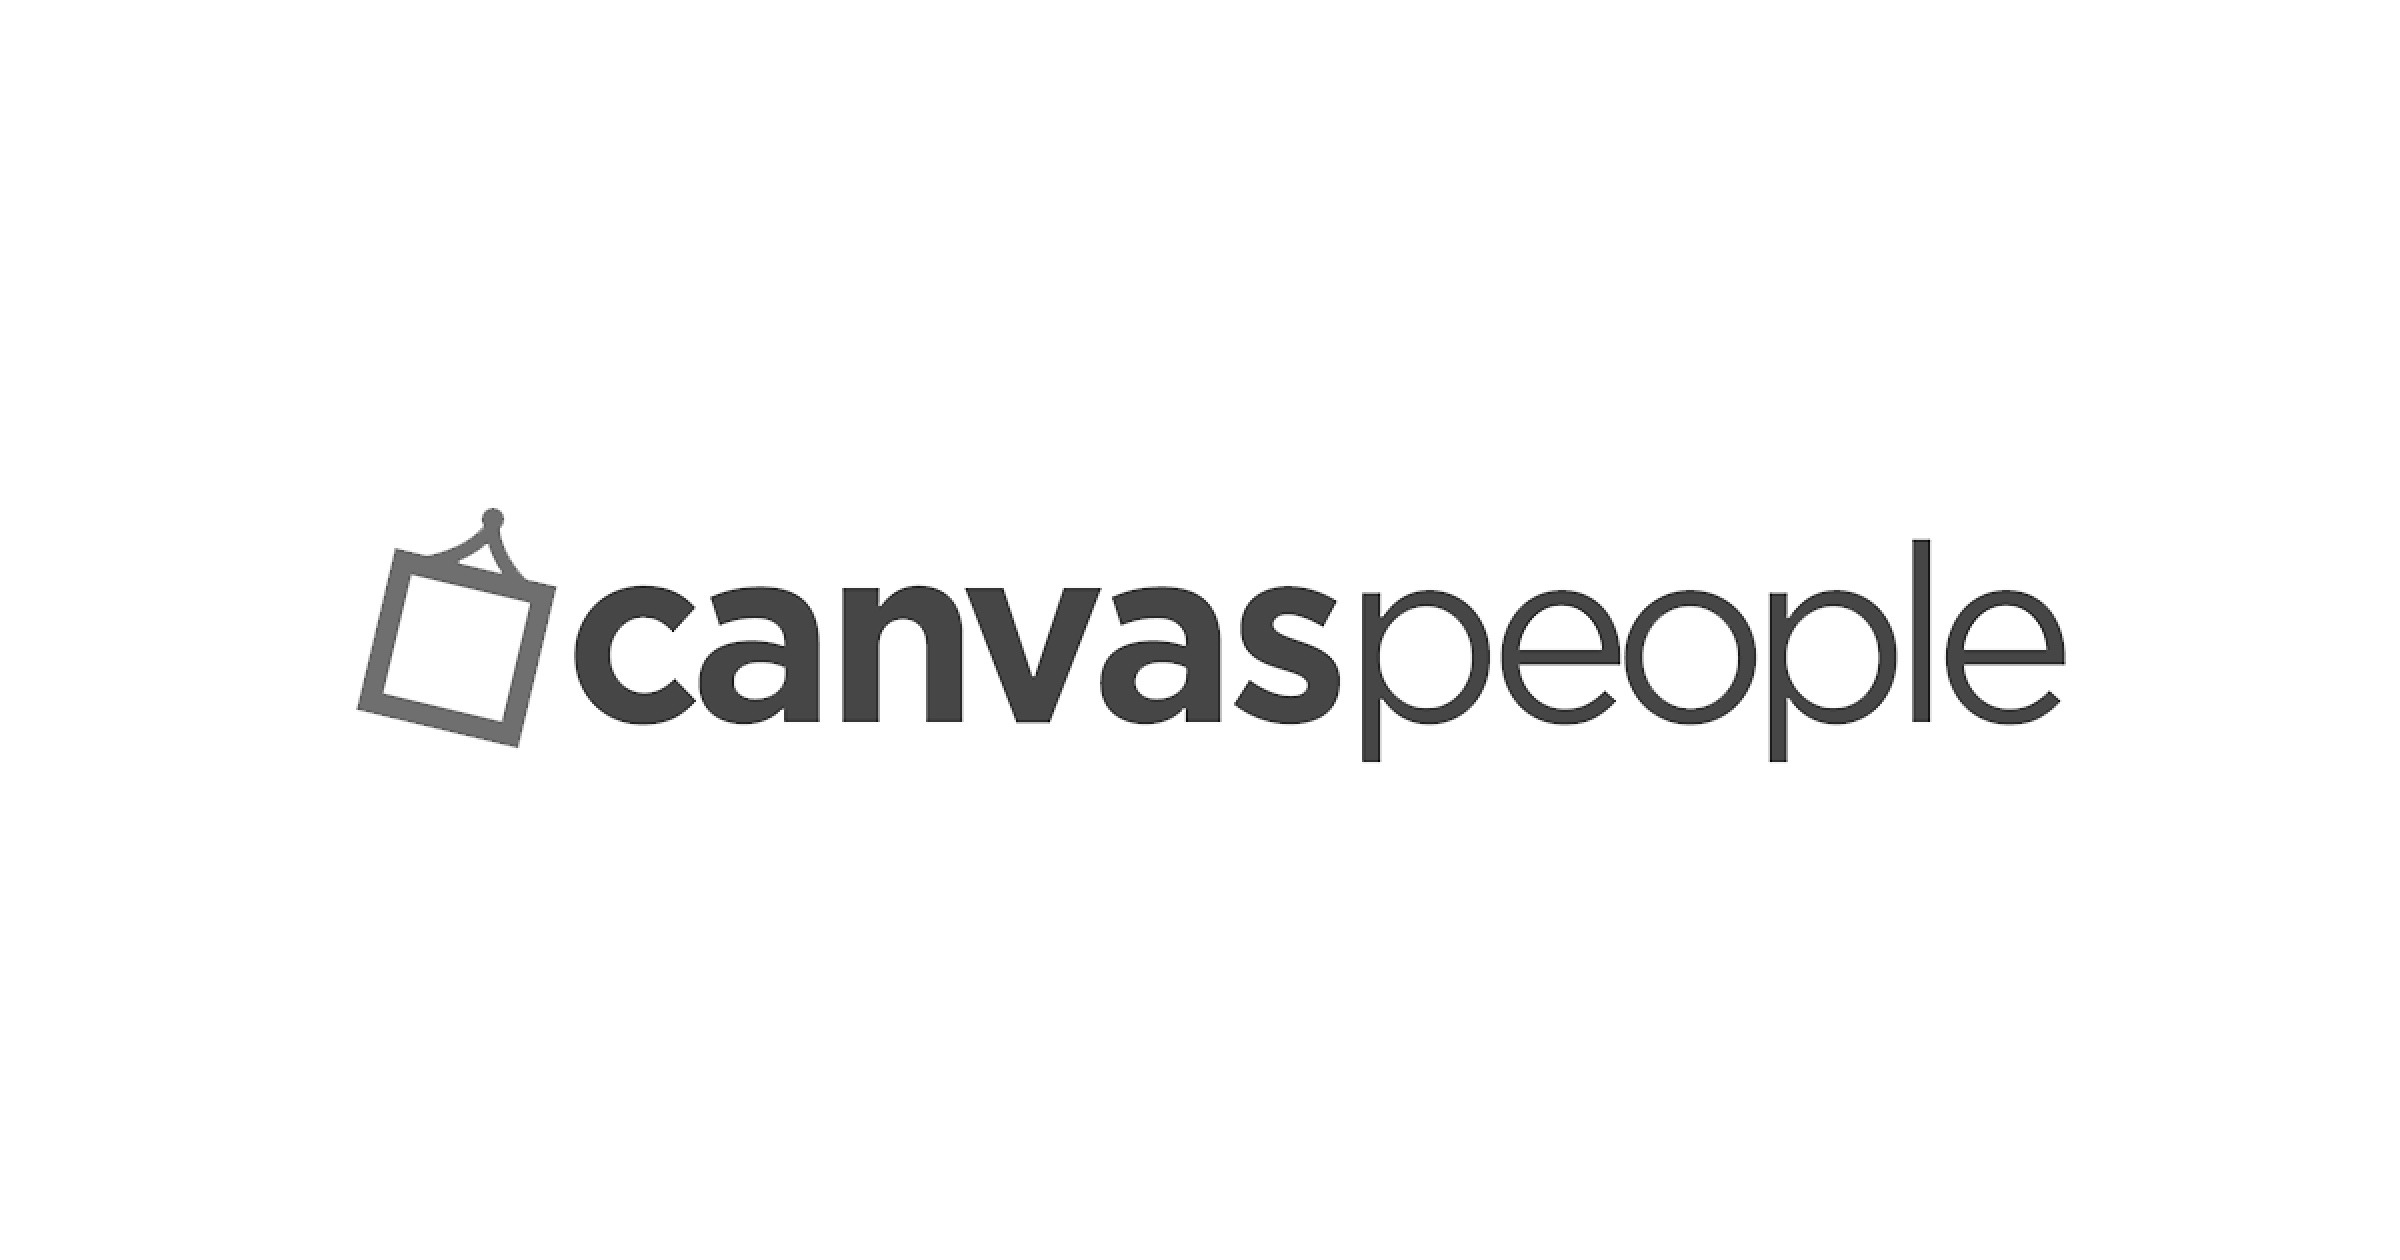 Canvas People coupon codes, promo codes and deals